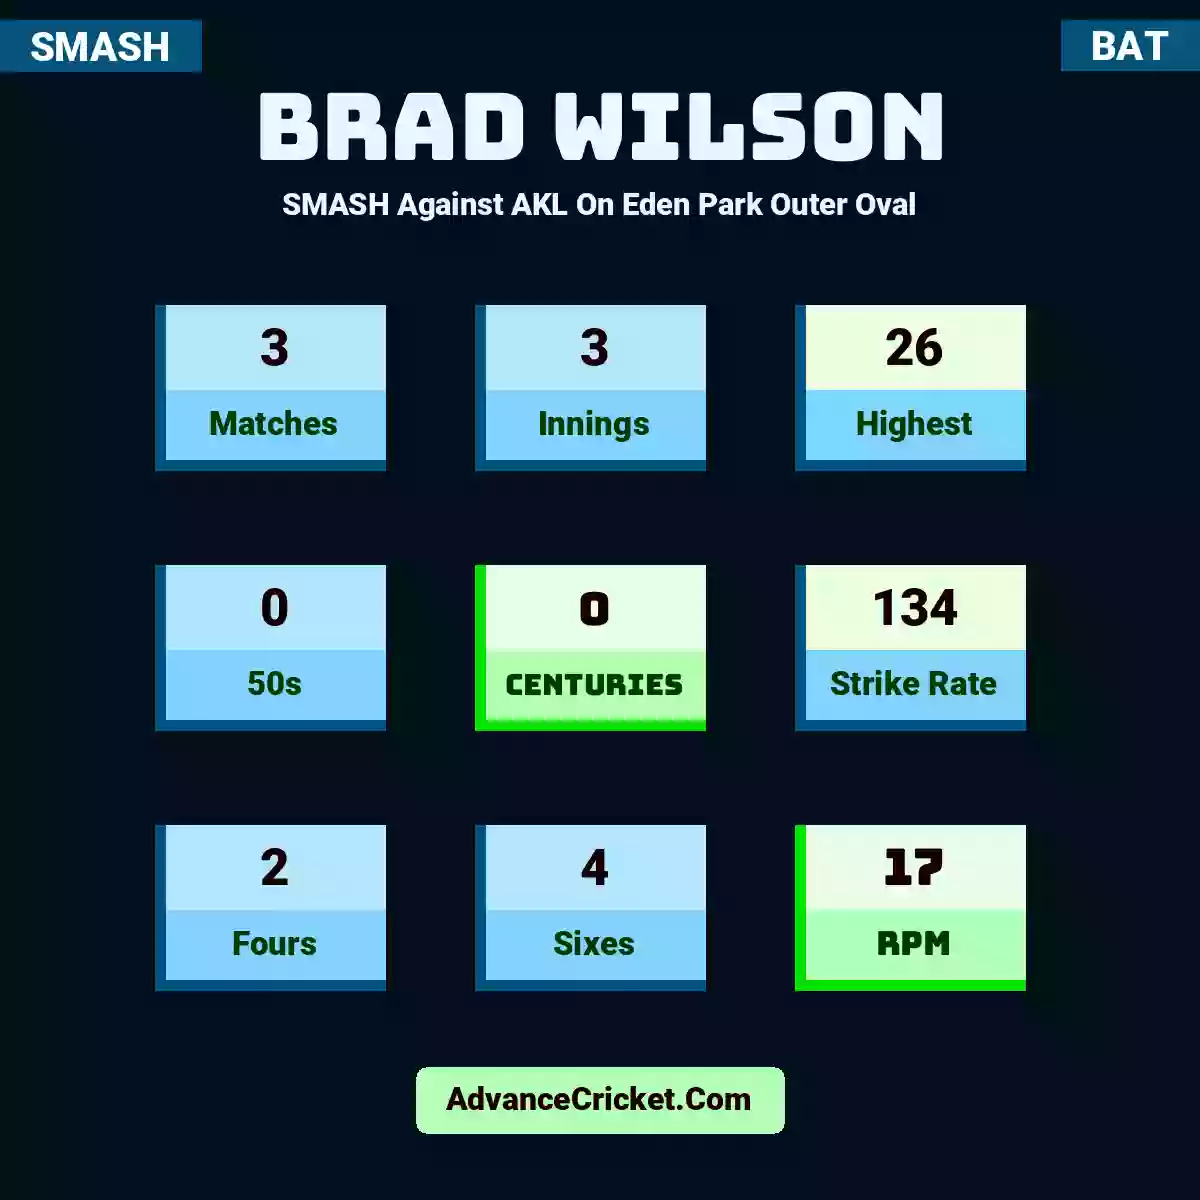 Brad Wilson SMASH  Against AKL On Eden Park Outer Oval, Brad Wilson played 3 matches, scored 26 runs as highest, 0 half-centuries, and 0 centuries, with a strike rate of 134. B.Wilson hit 2 fours and 4 sixes, with an RPM of 17.